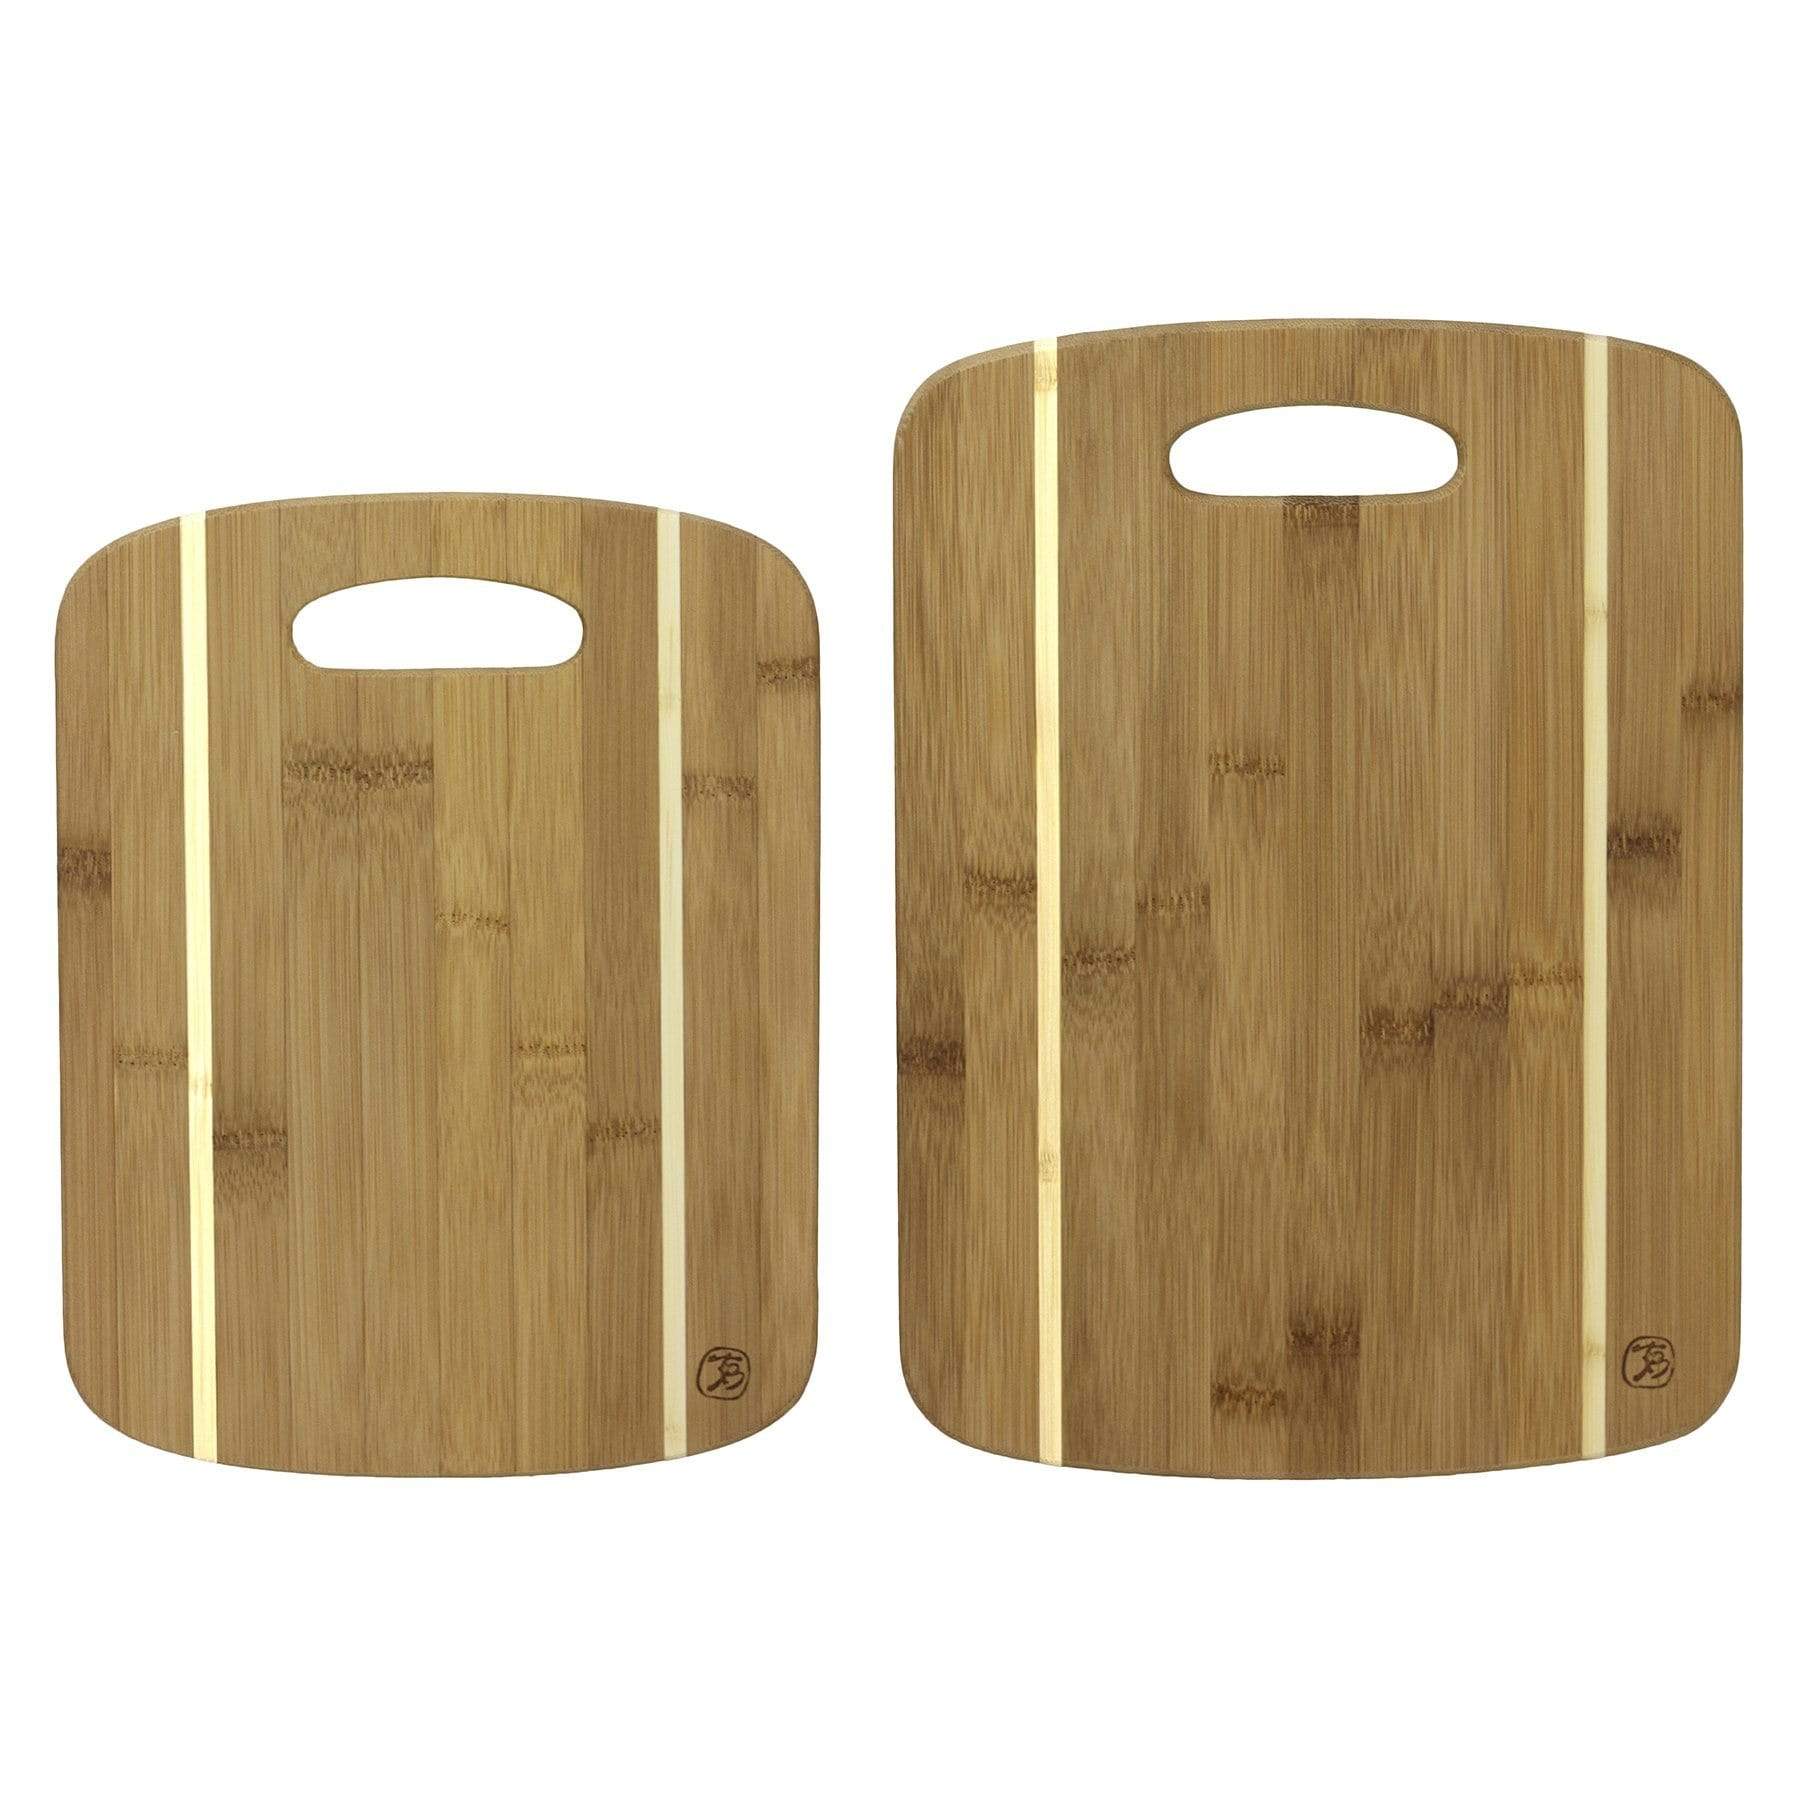 Set of 2 bamboo cutting boards